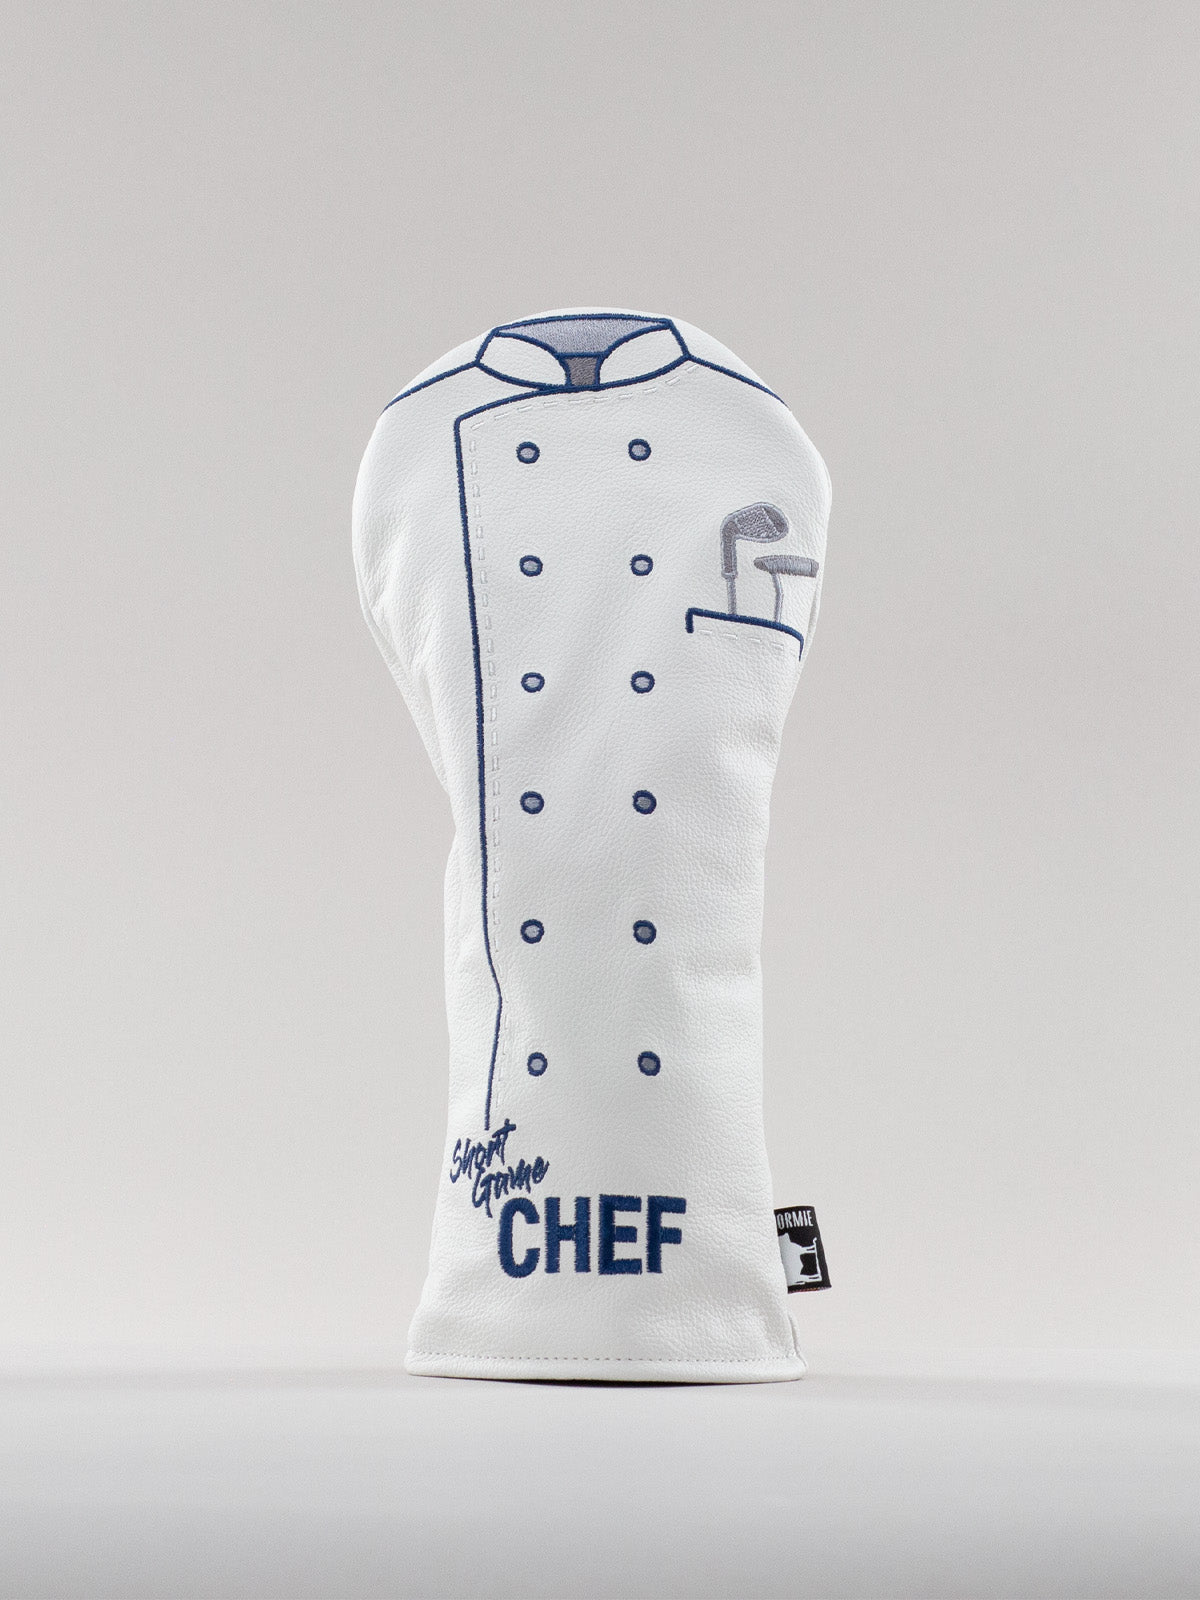 Dormie Chef's Whites for Short Game Chef Headcover